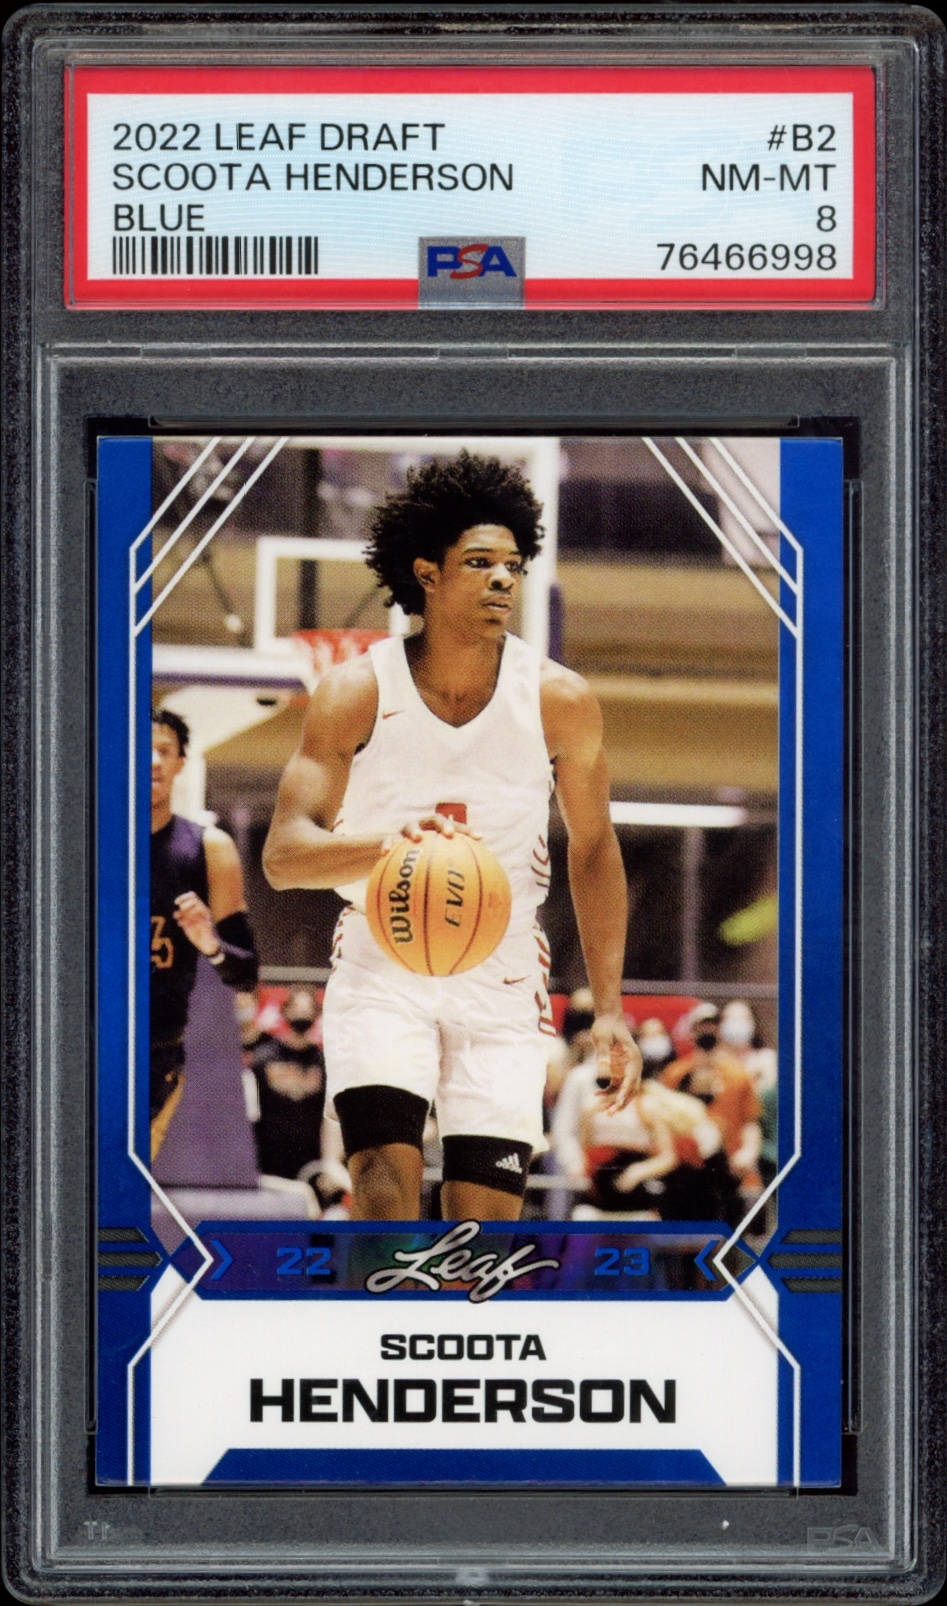 2022 Leaf Draft Scooter Henderson basketball card in NM-MT 8 condition with autograph.